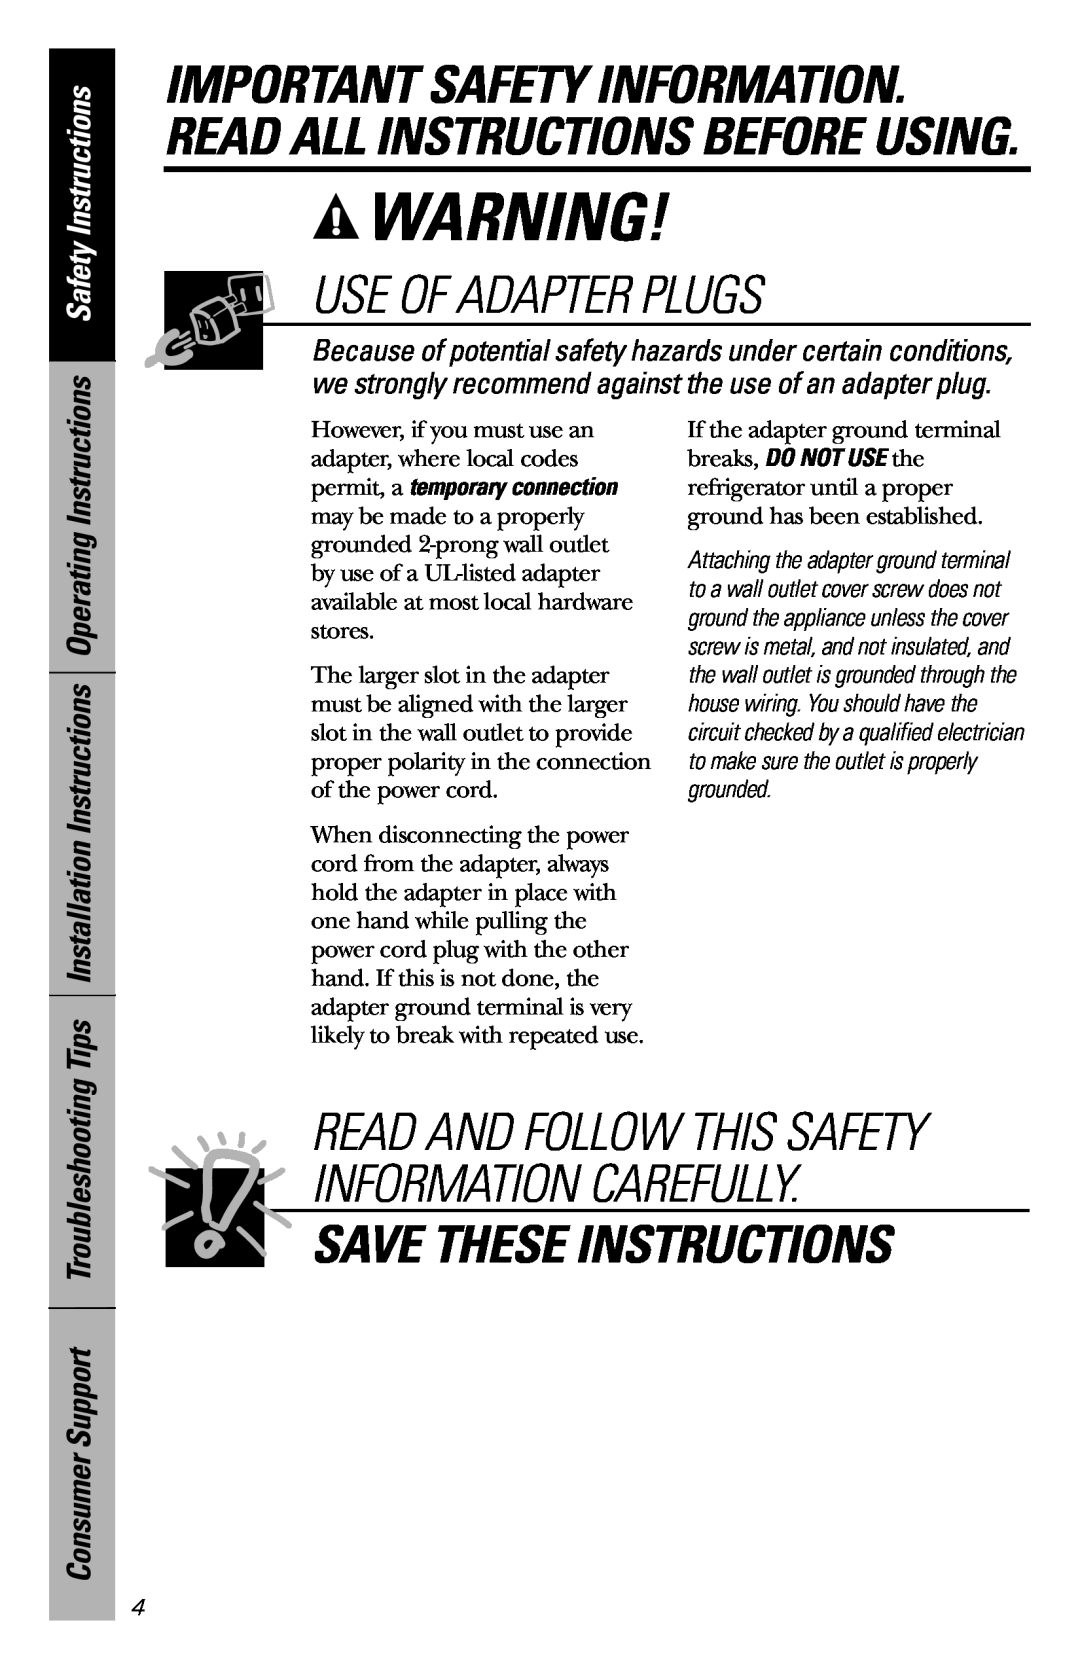 GE Cubic Foot Use Of Adapter Plugs, Safety Instructions, Consumer Support Troubleshooting, Save These Instructions 